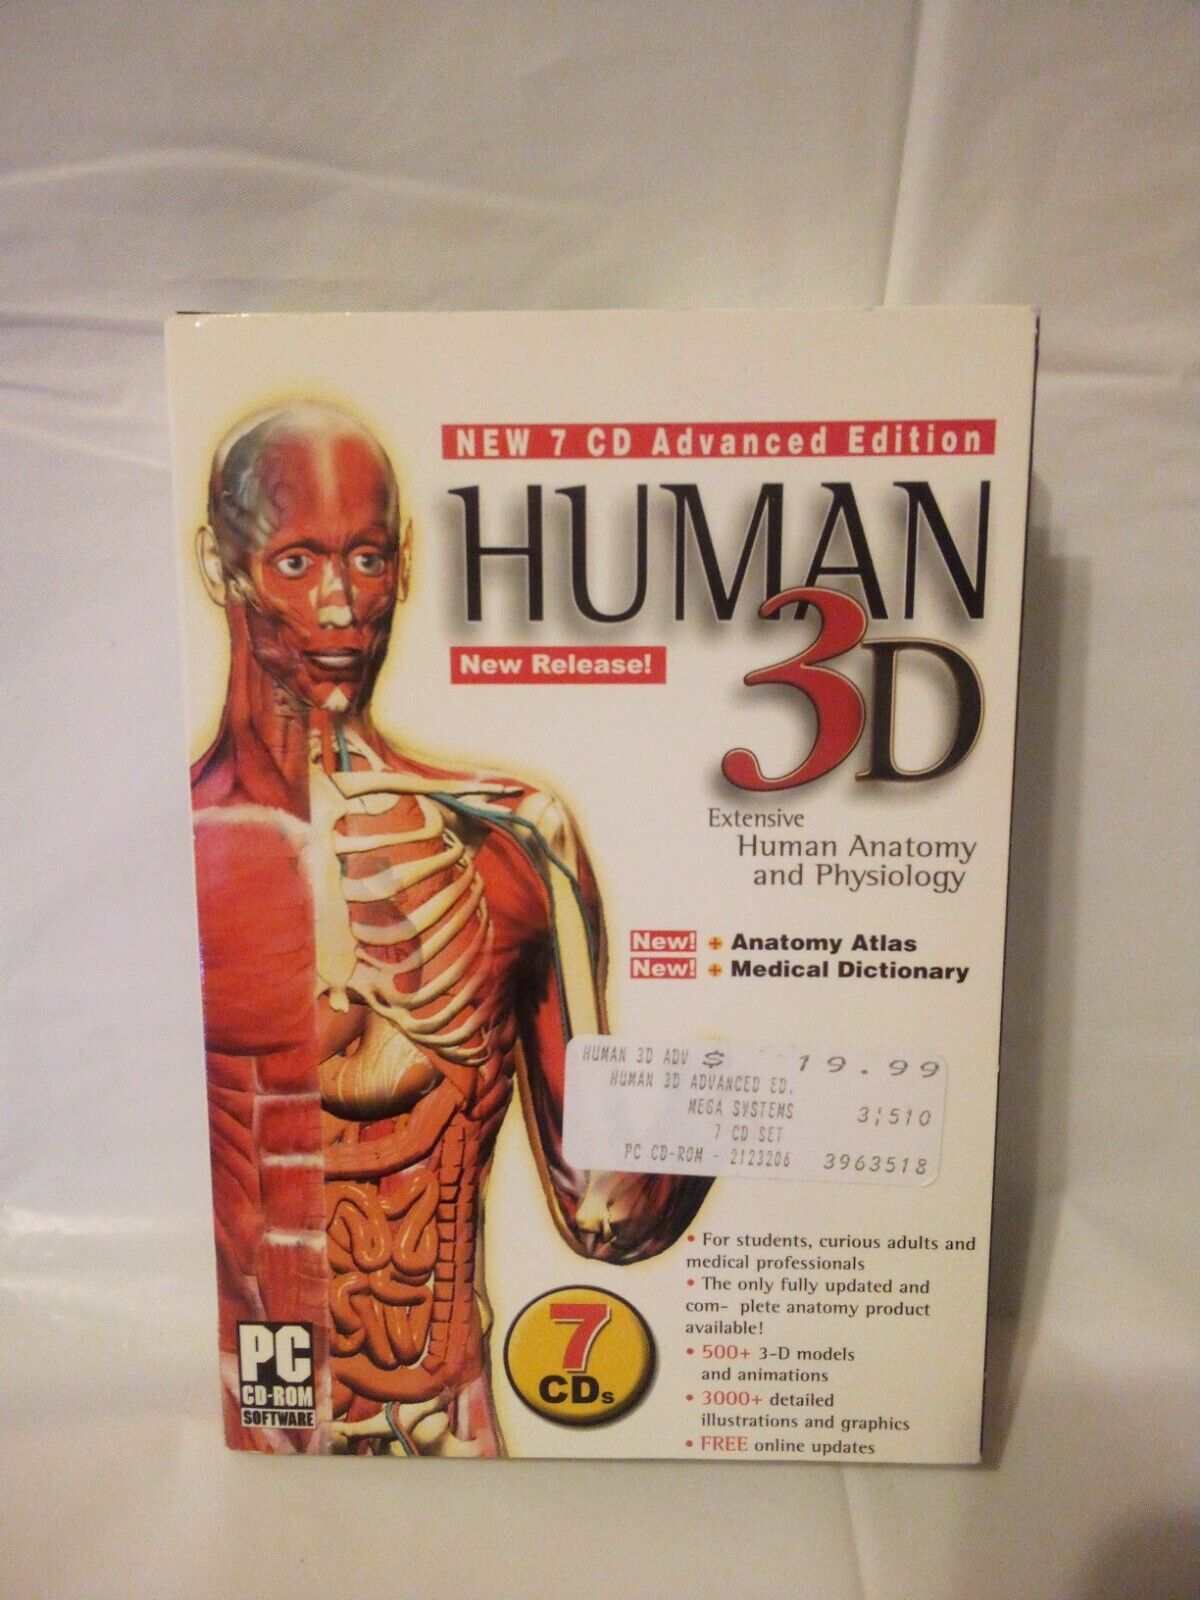 Human 3D Advanced Edition 7-Disc Set PC CD anatomy physiology learning study